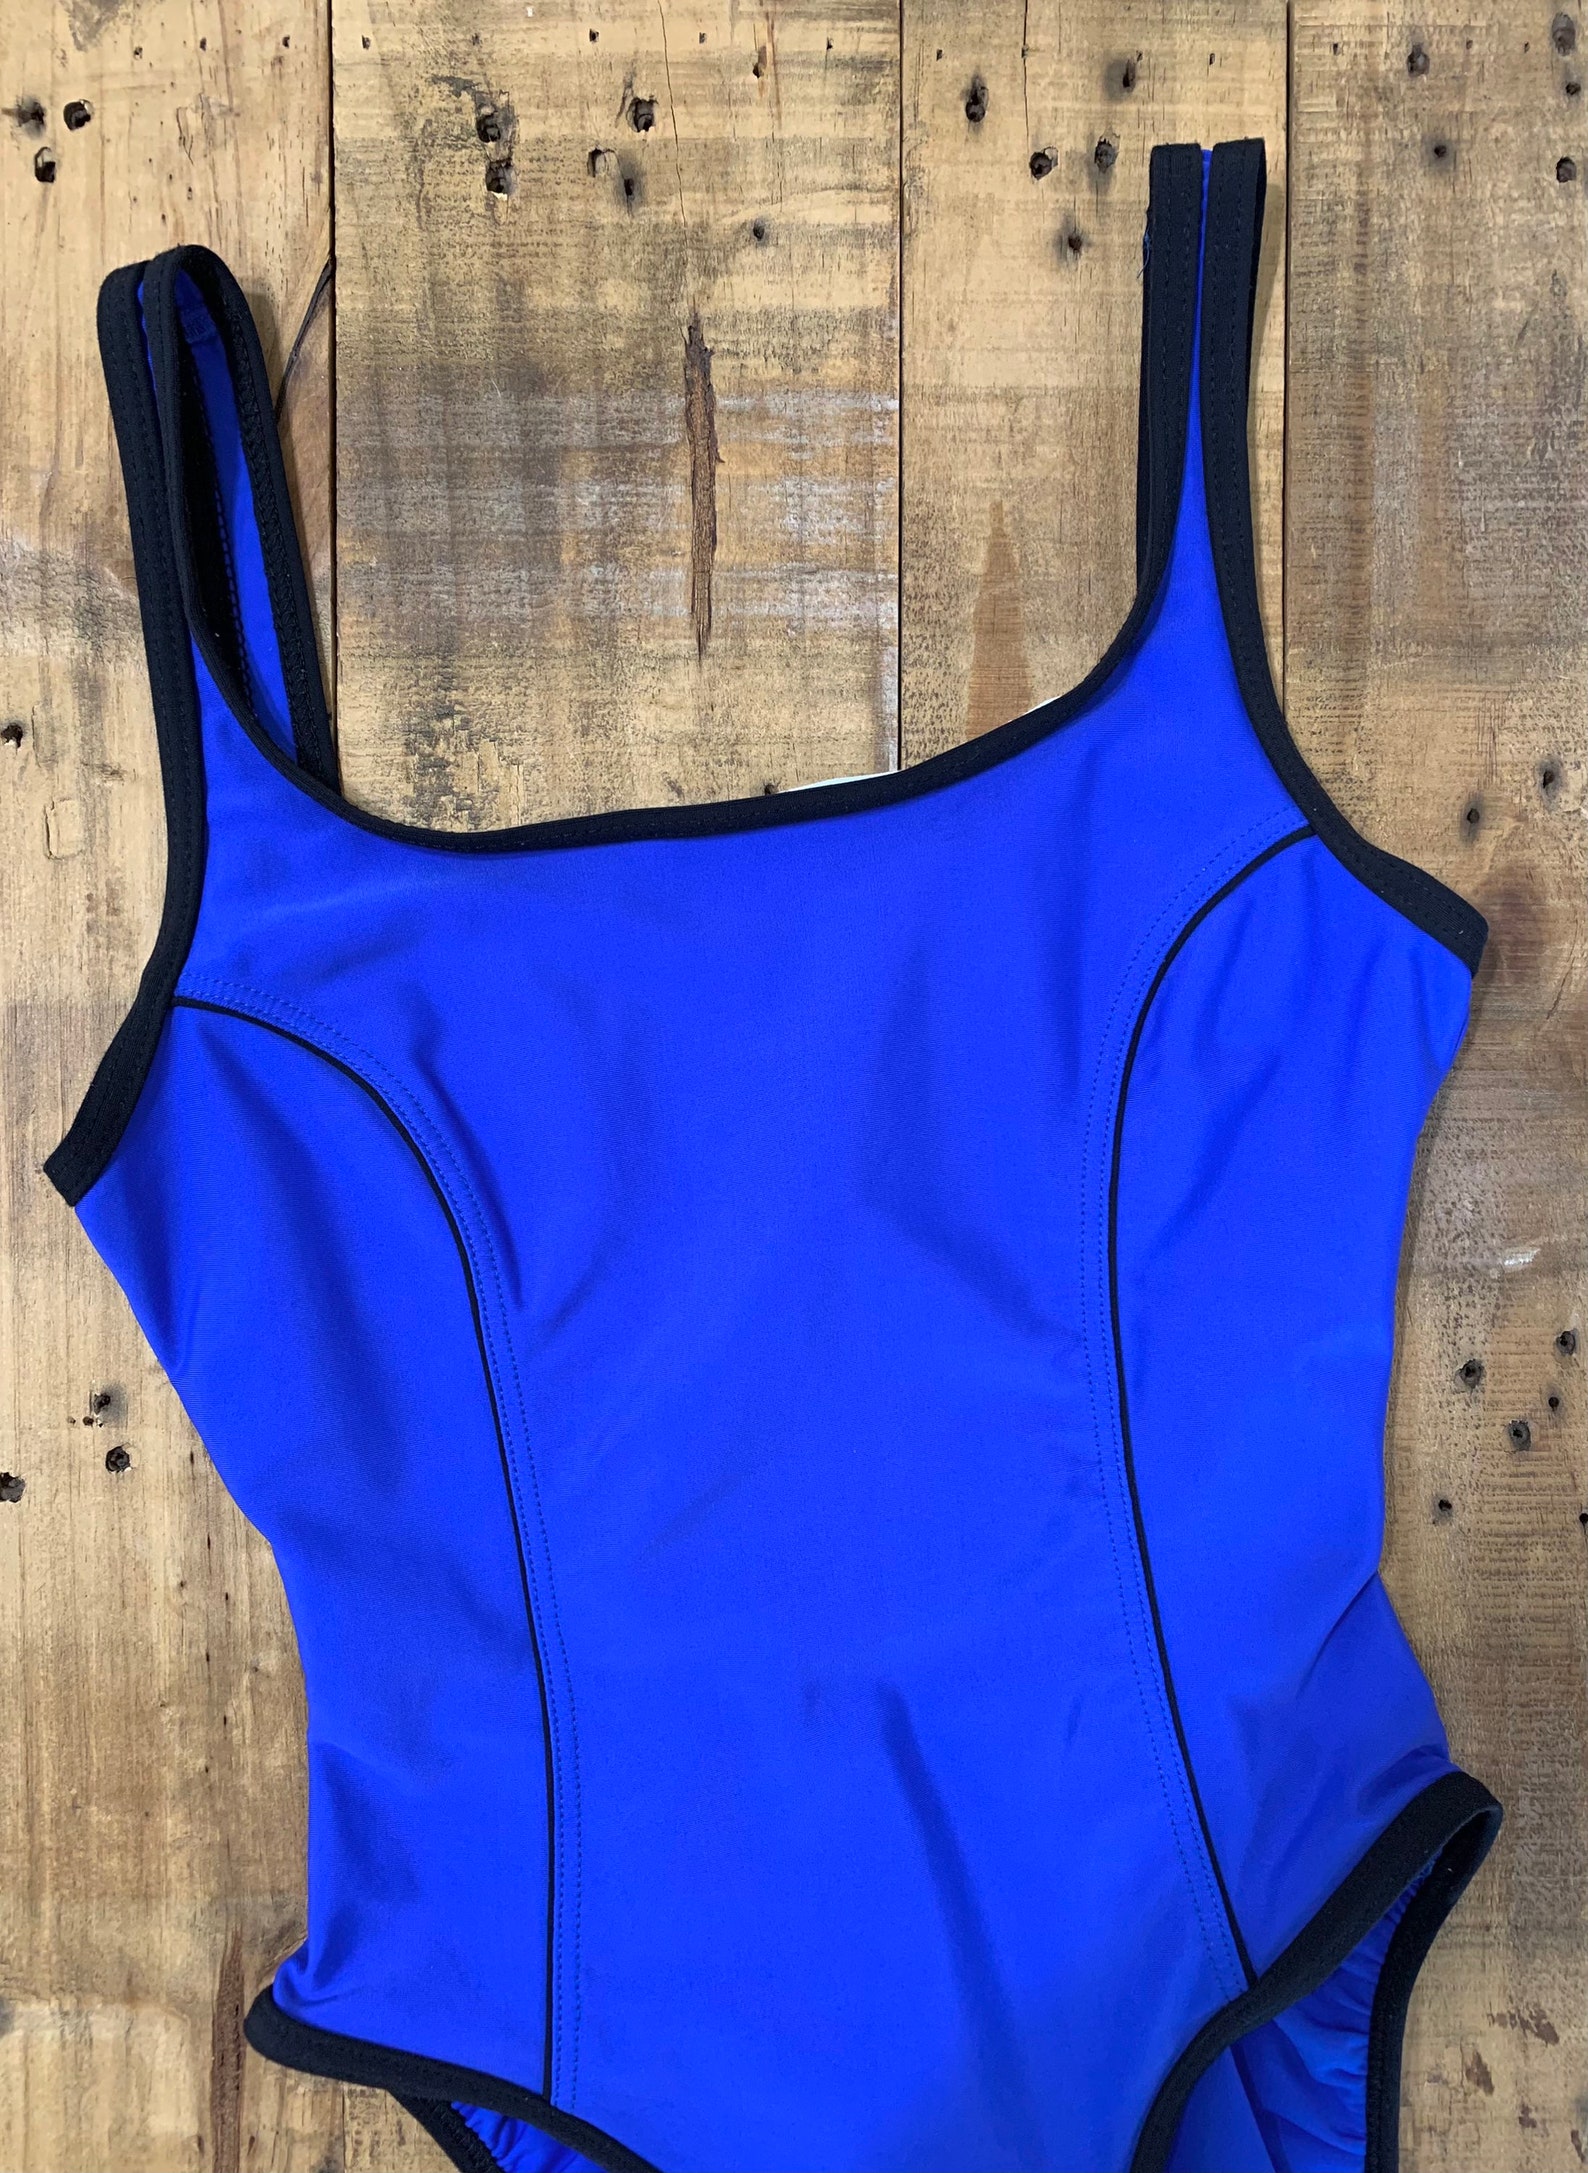 90s High Cut Swimsuit One Piece High Thigh / 90s Swimsuit / | Etsy